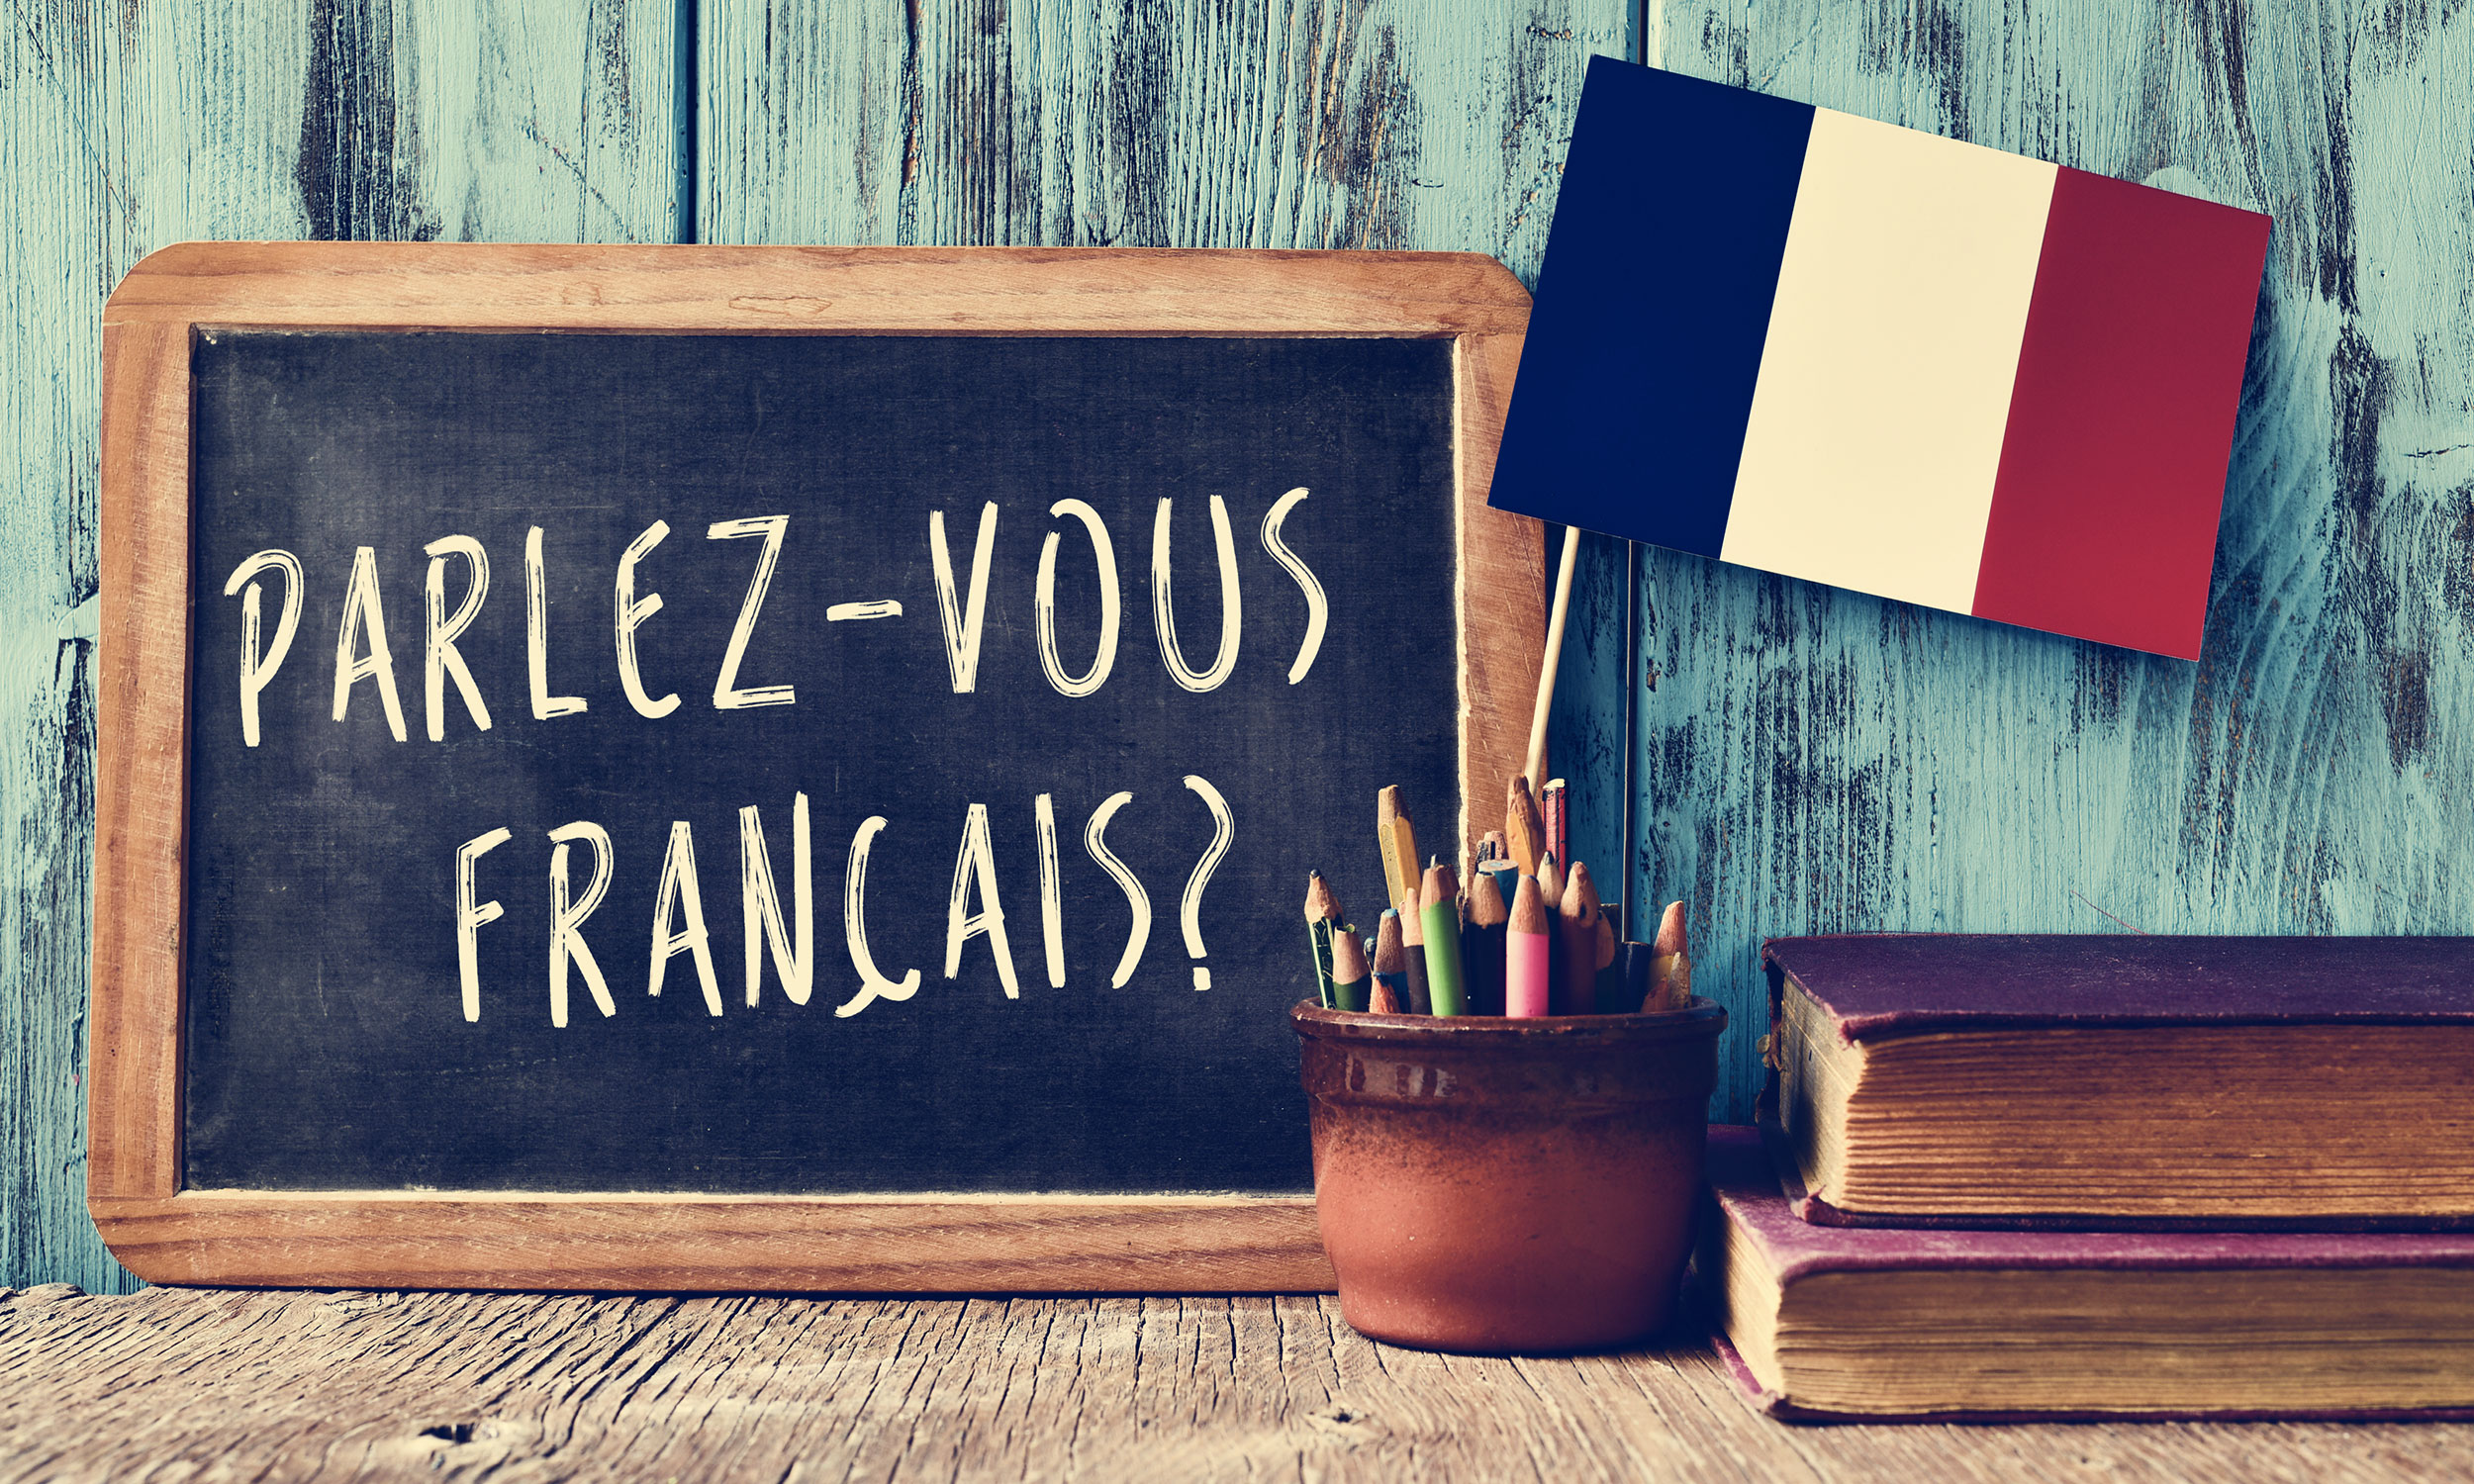 <p>You're wondering what is the quickest way to learn French? We all want to be able to learn new languages quickly… Especially French! So, how to learn French fast? Obviously, the learning journey will be different for everybody, but we rounded up 6 quick ways to learn French and become fluent.</p>